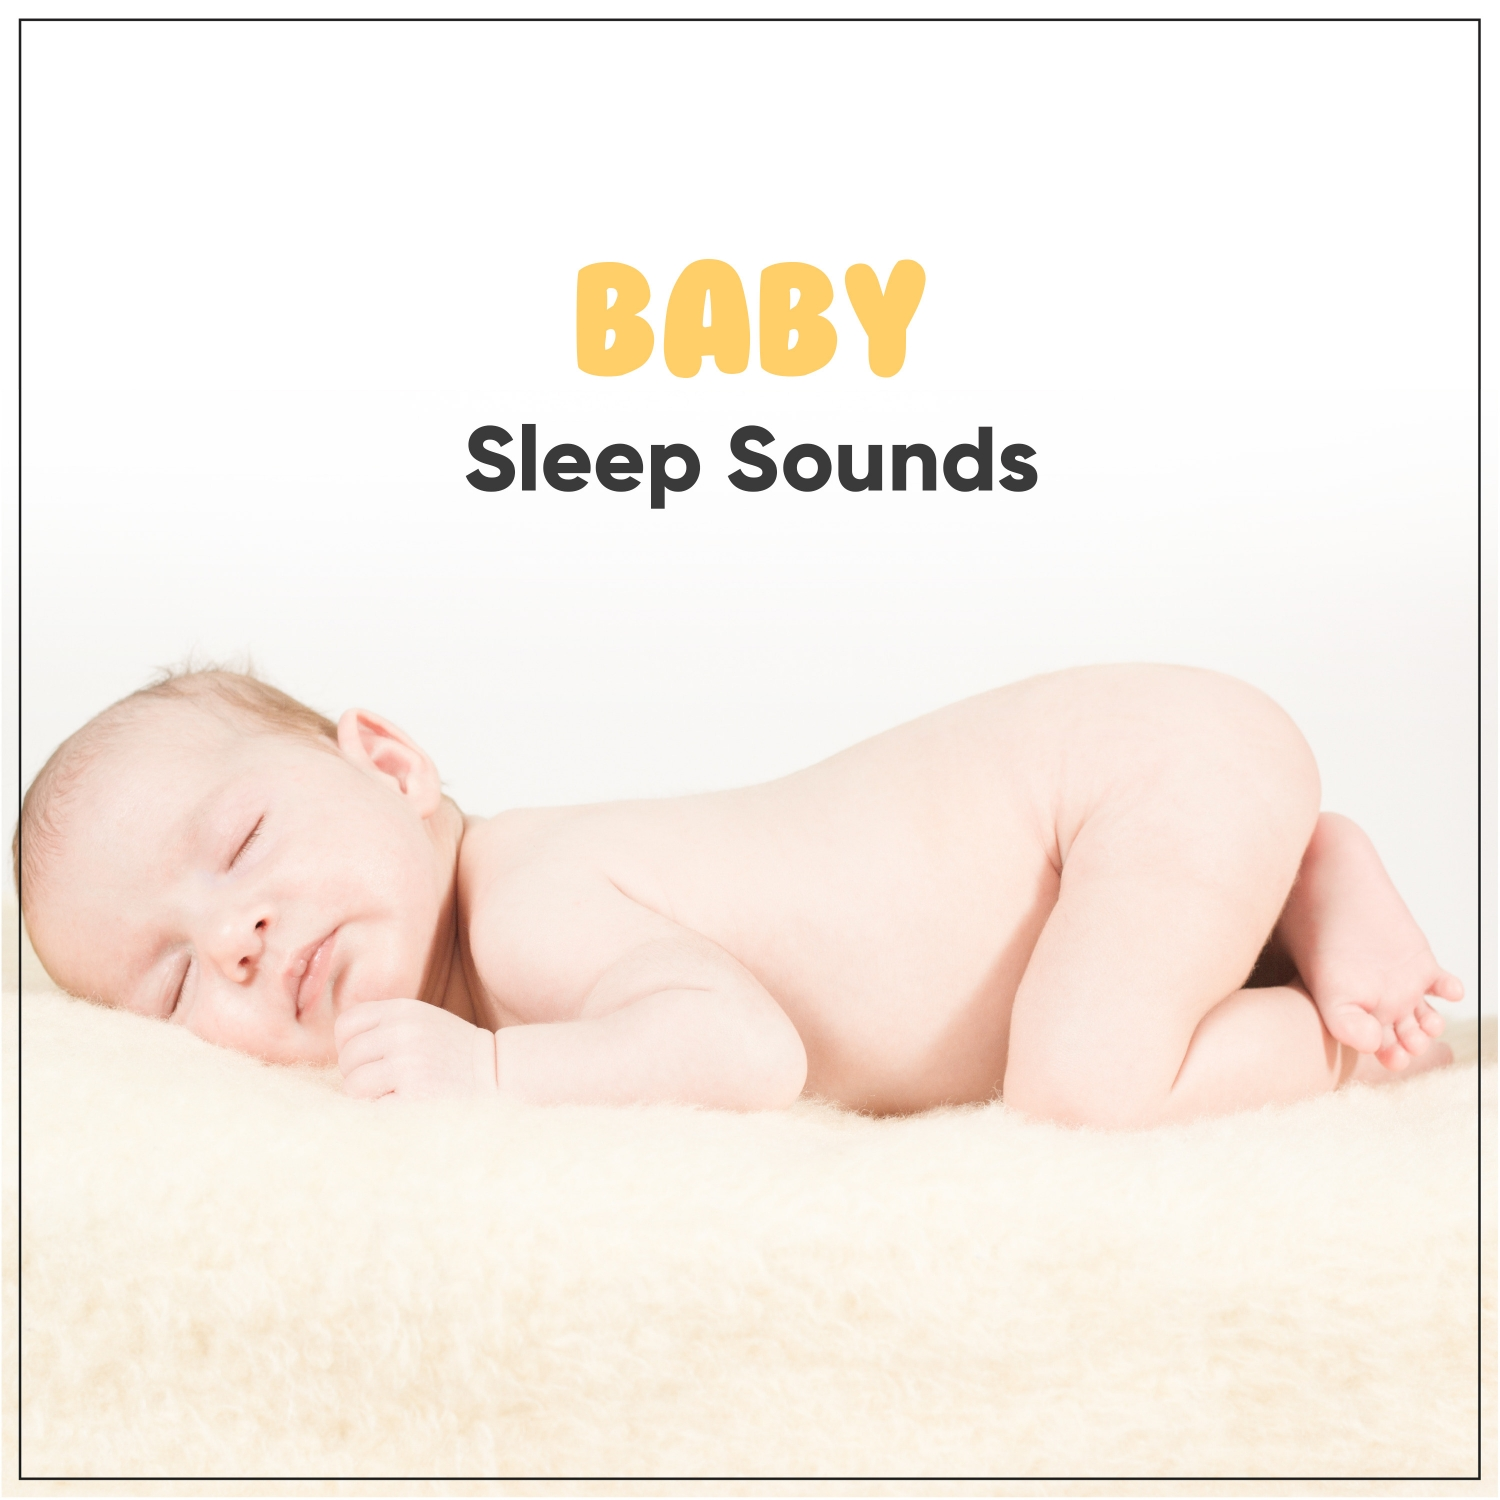 10 Rain and Thunder Relaxation Sounds - Put Your Baby to Sleep for Proper Rest